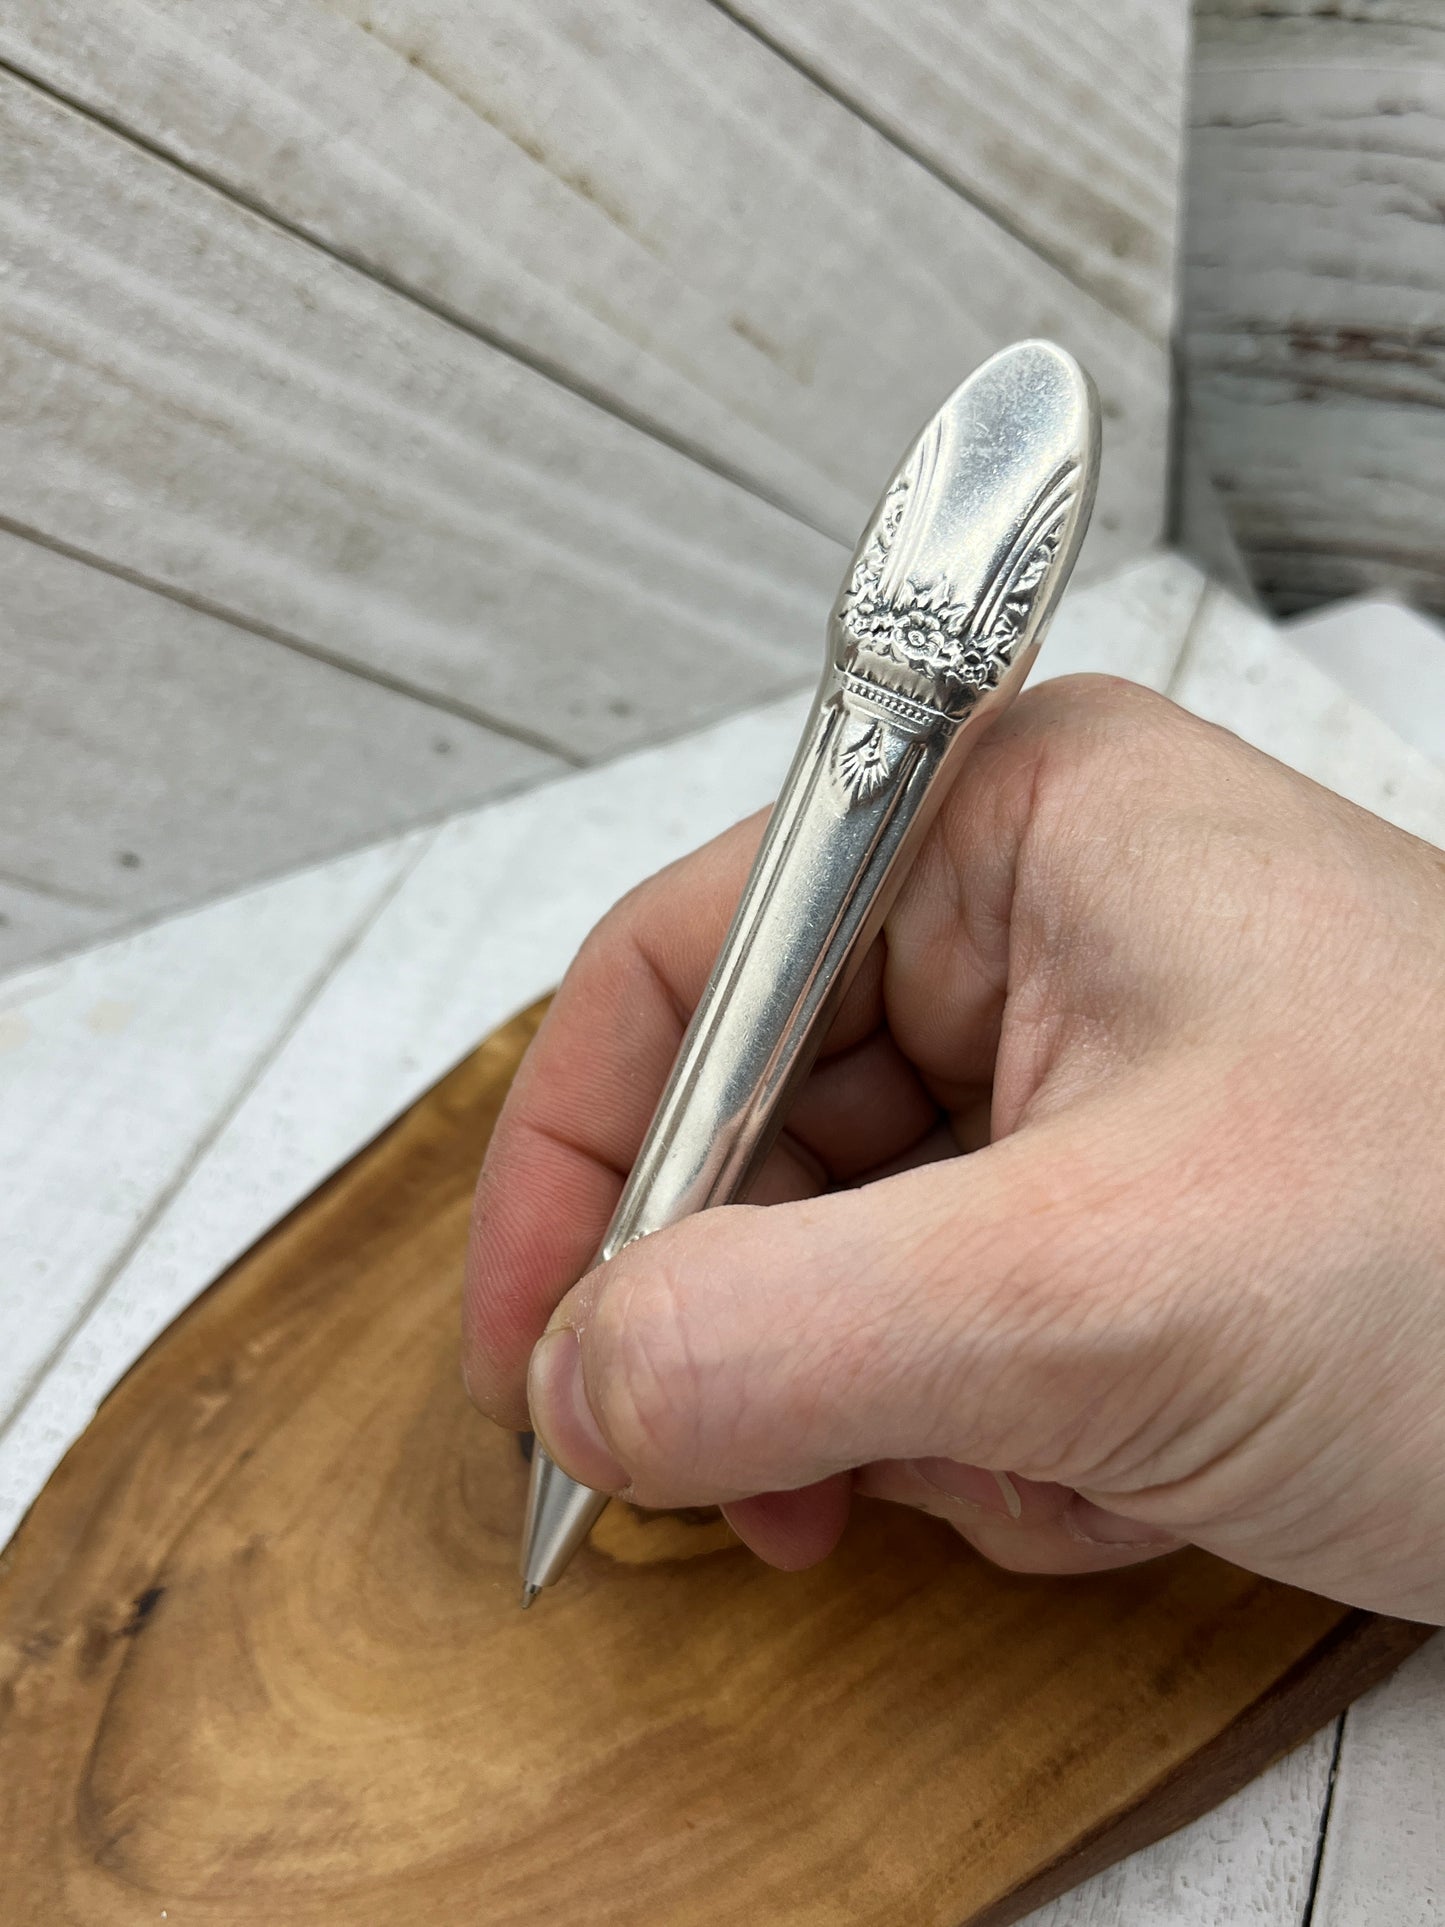 Silver pen made from antique hollow knife handles - Black ink - Reusable